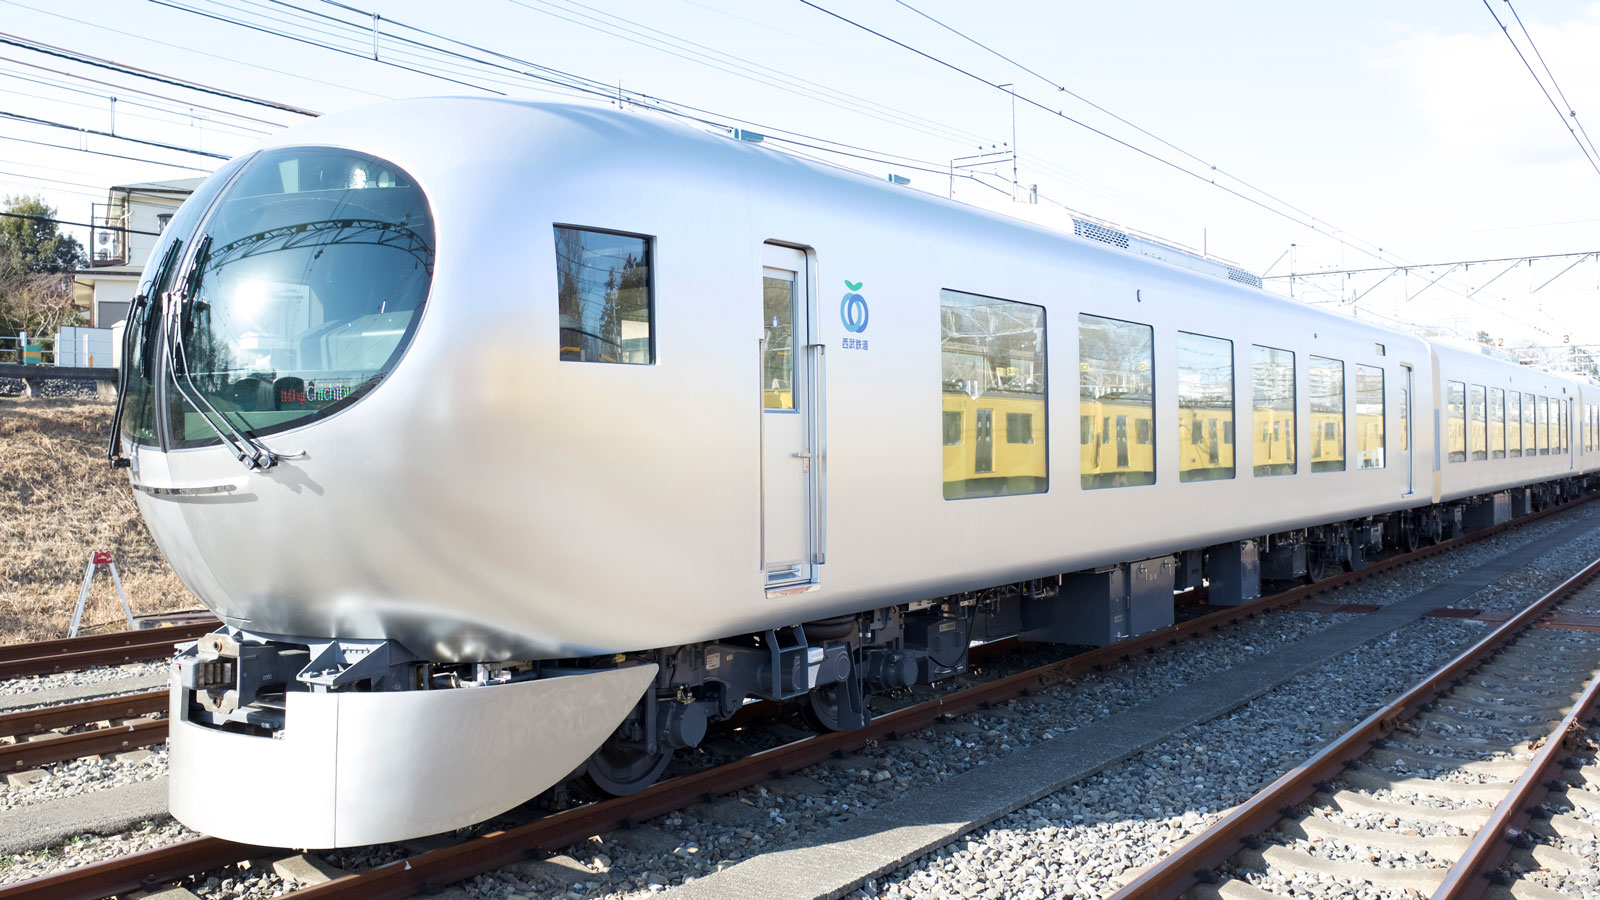 Laview train in Japan designed for speed and comfort